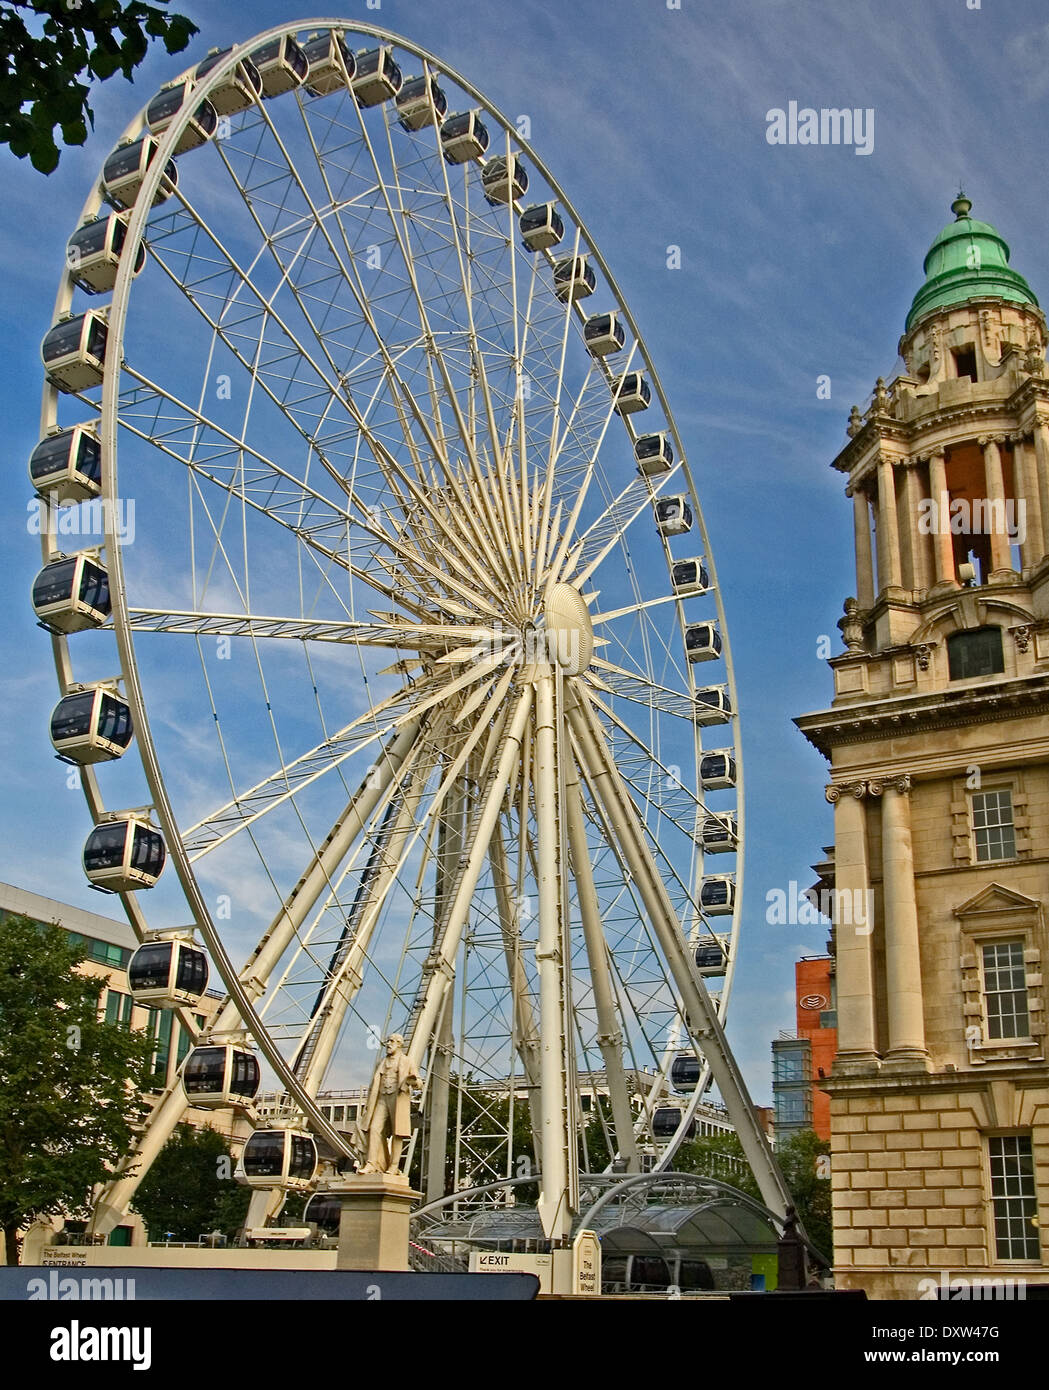 The Belfast Eye is the City's latest attraction, set in the grounds of the City Hall. Stock Photo